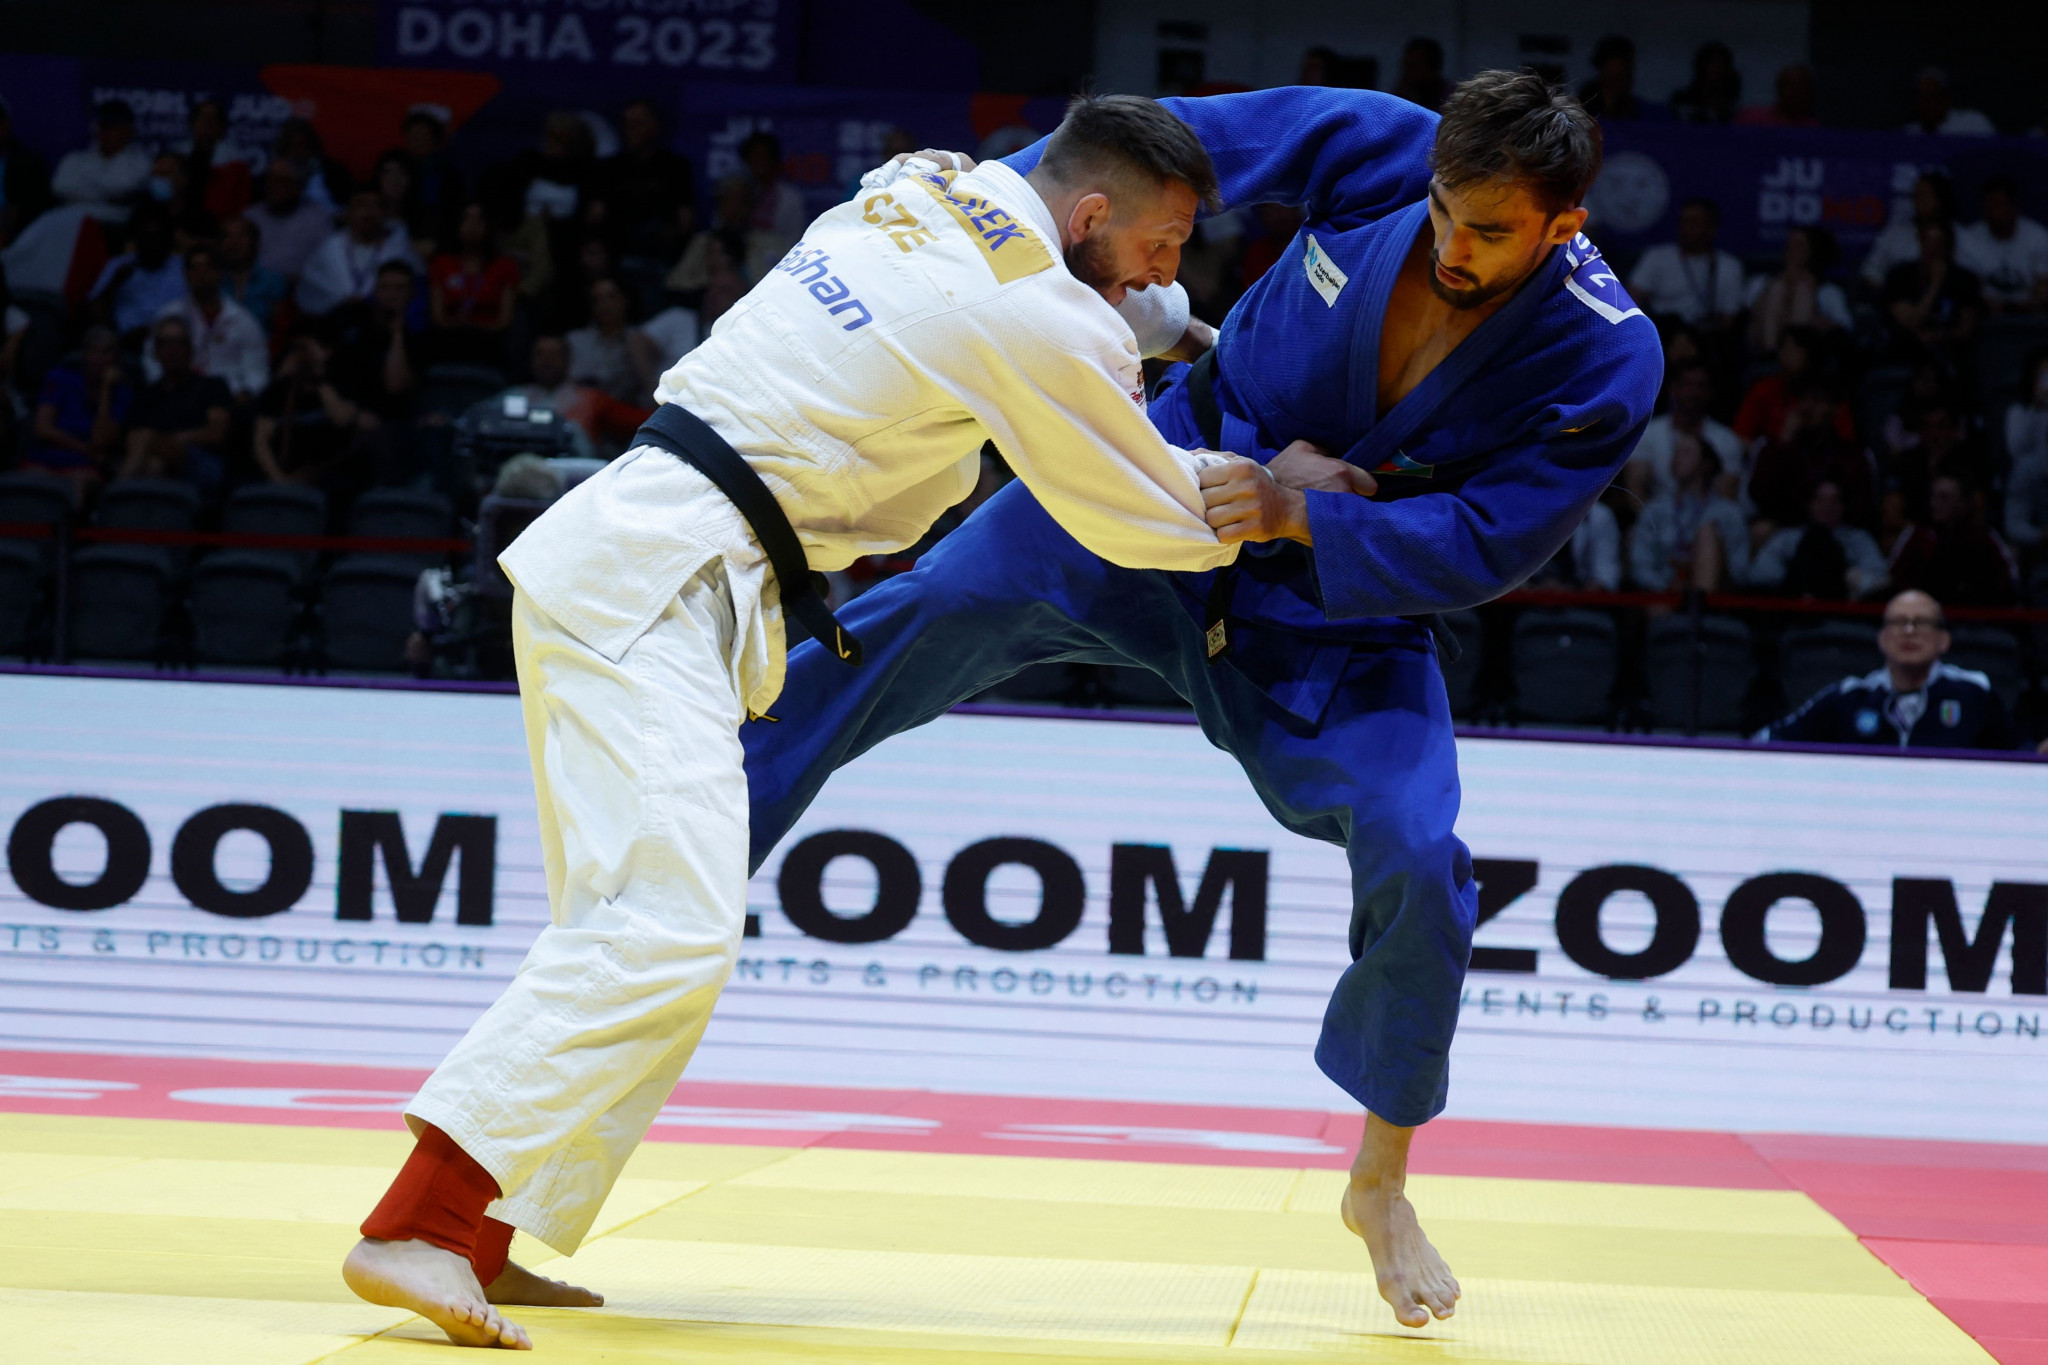 World Judo Championships: Day six of competition